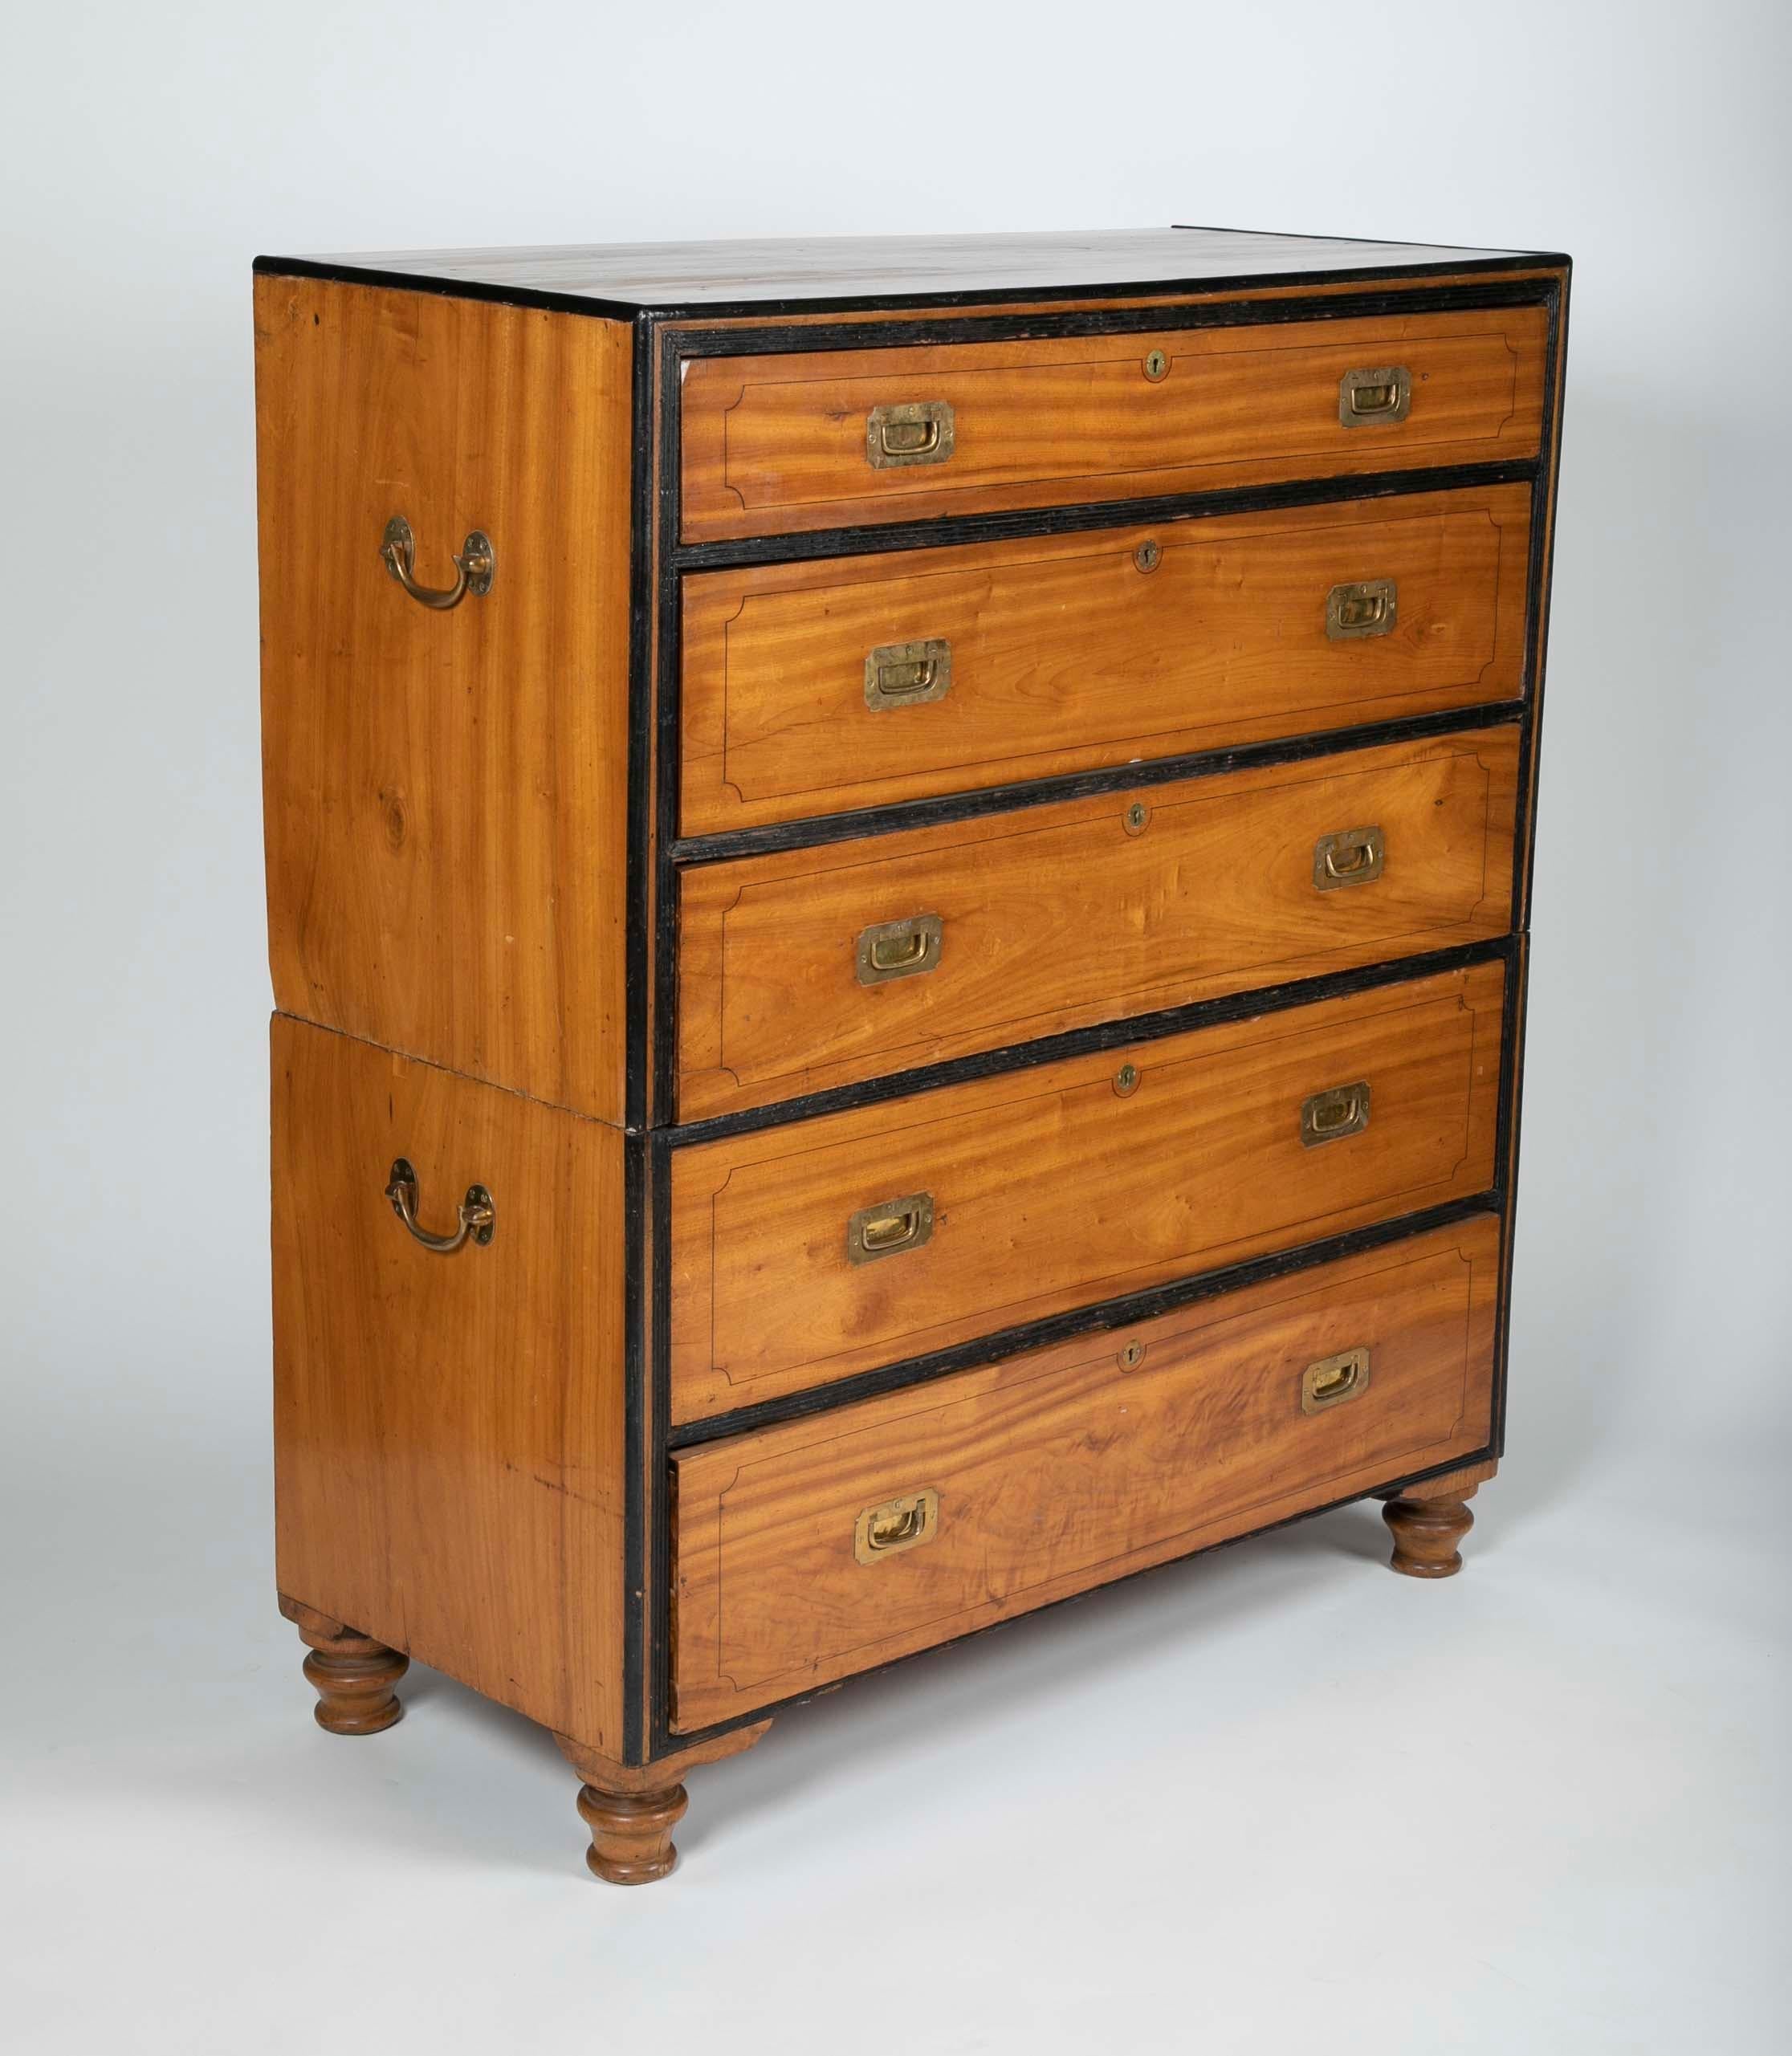 A large, China-trade, camphor wood campaign chest with secretary, circa 1860. It retains its original four brass bail carrying handles. The sides are made of single pieces of wood. The upper section contains a drop-down, pull-out secretary drawer